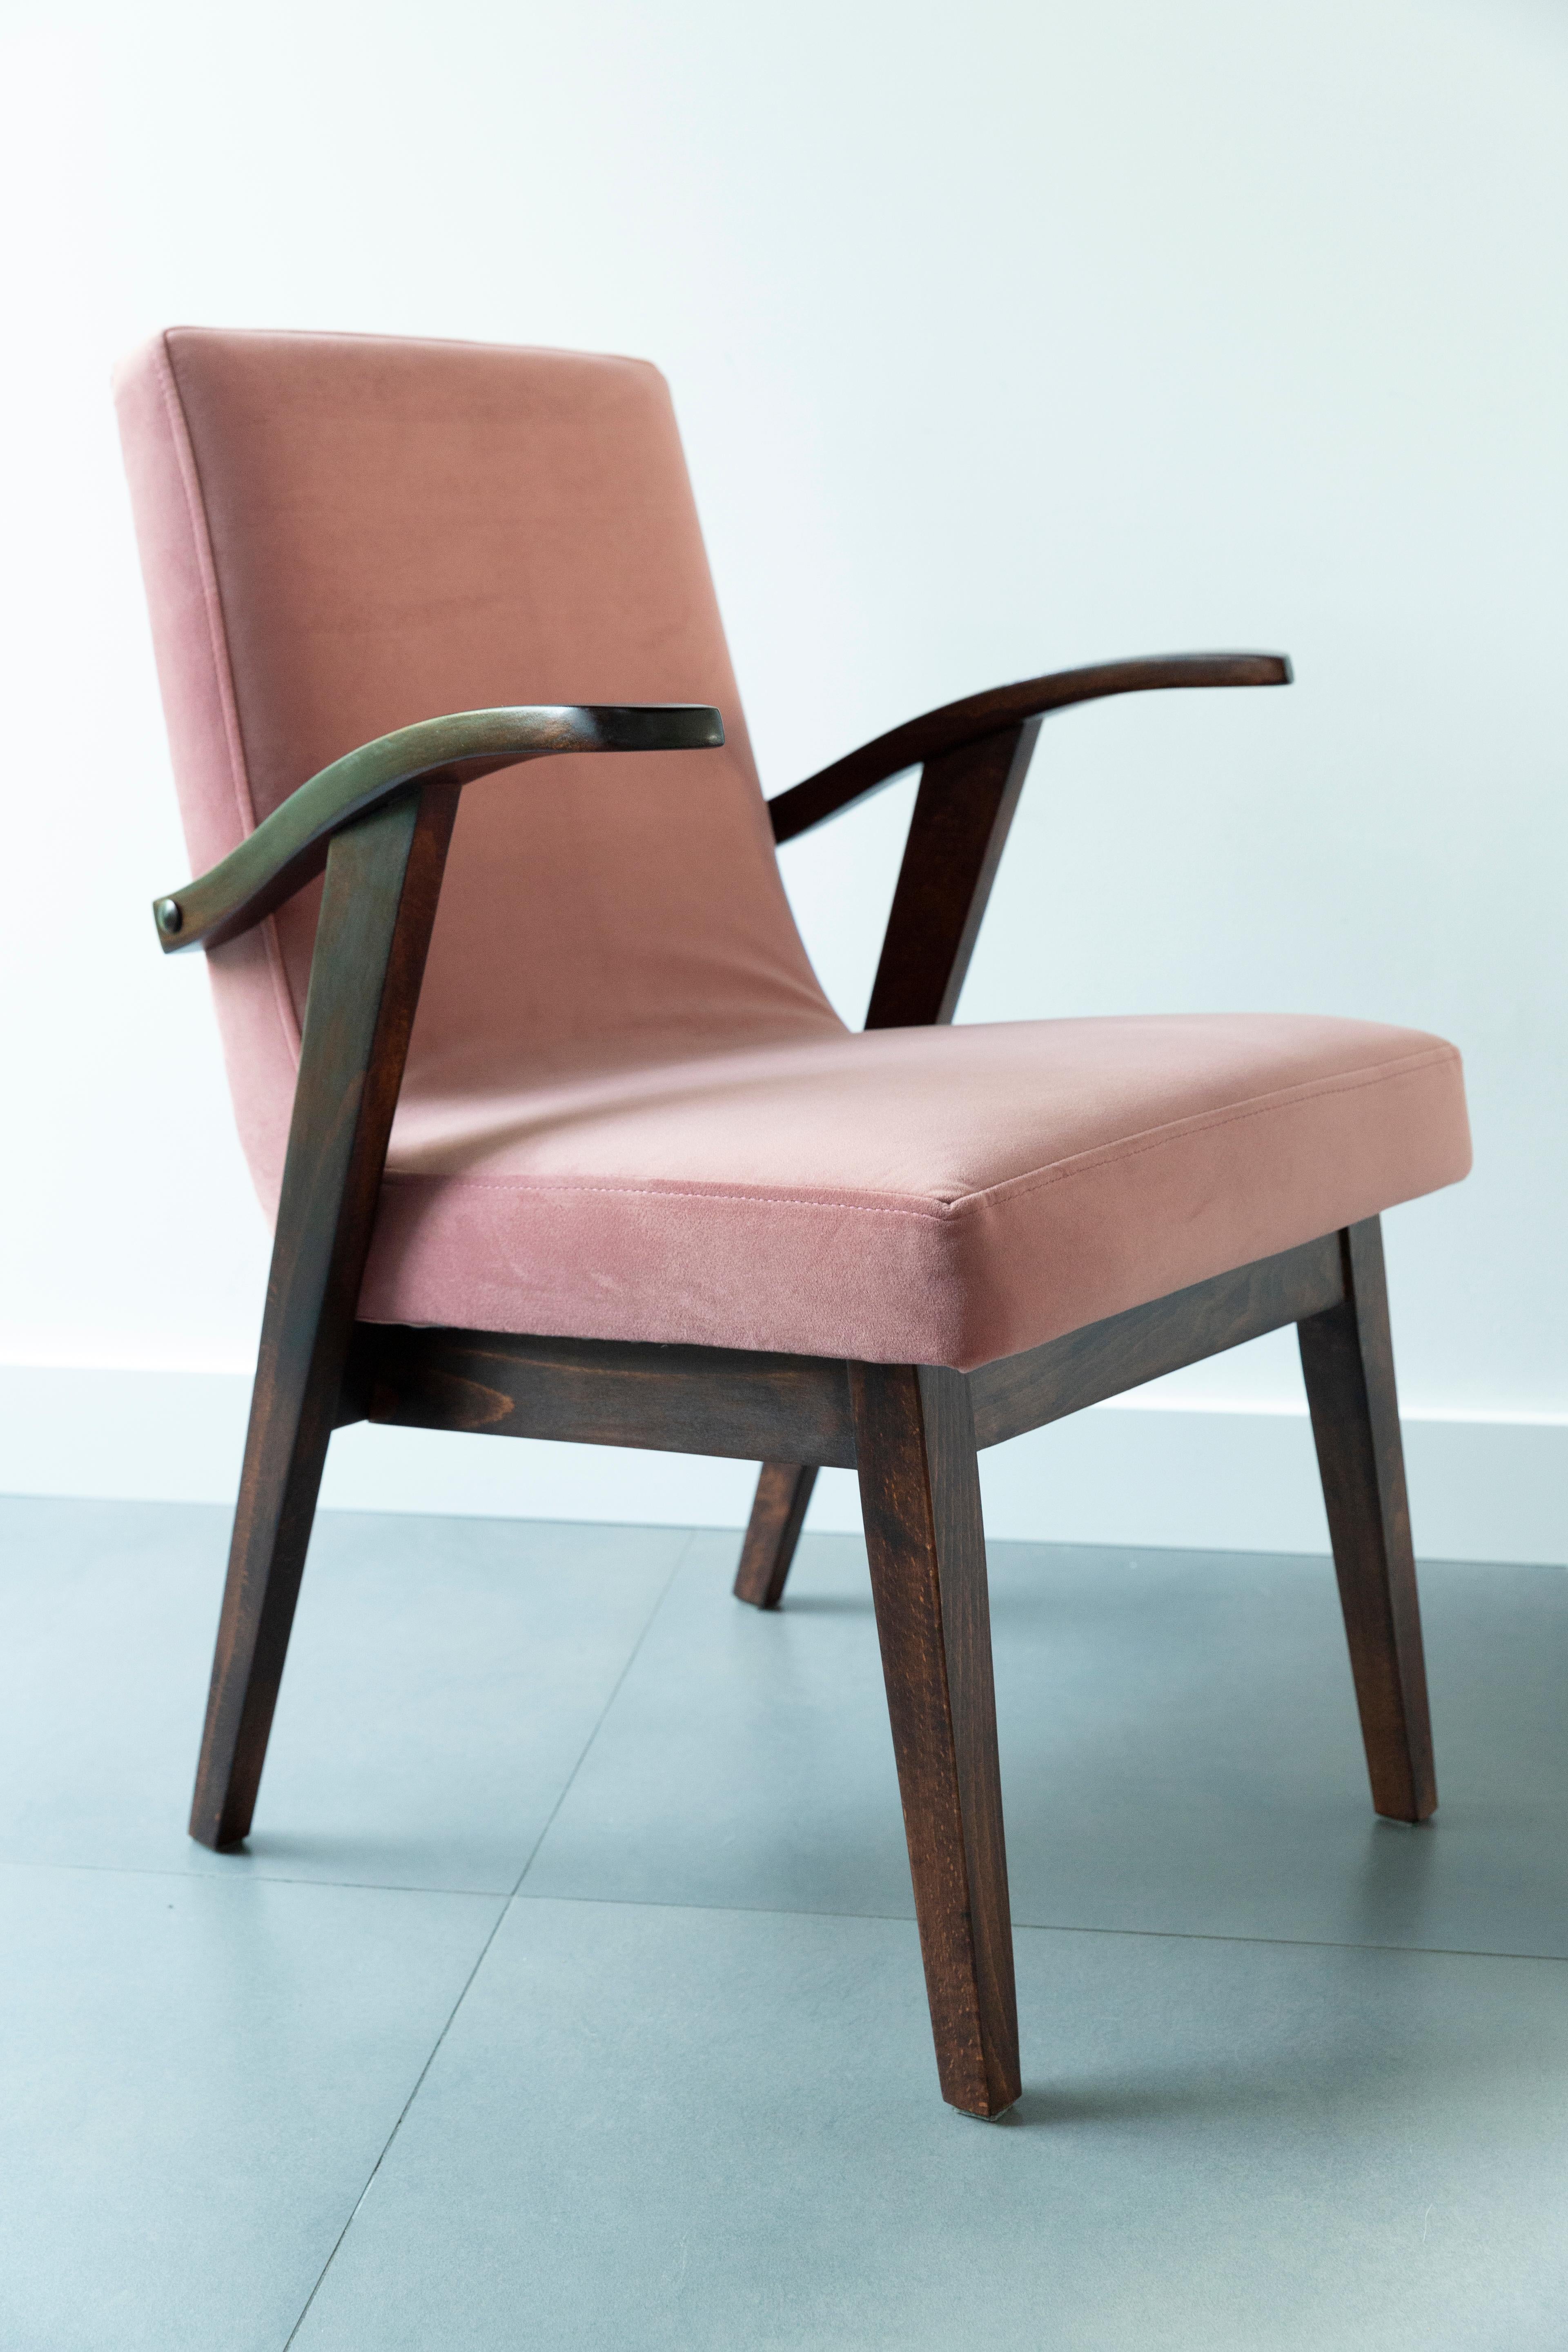 Polish 20th Century Vintage Armchair in Dusty Pink Velvet by Mieczyslaw Puchala, 1960s For Sale